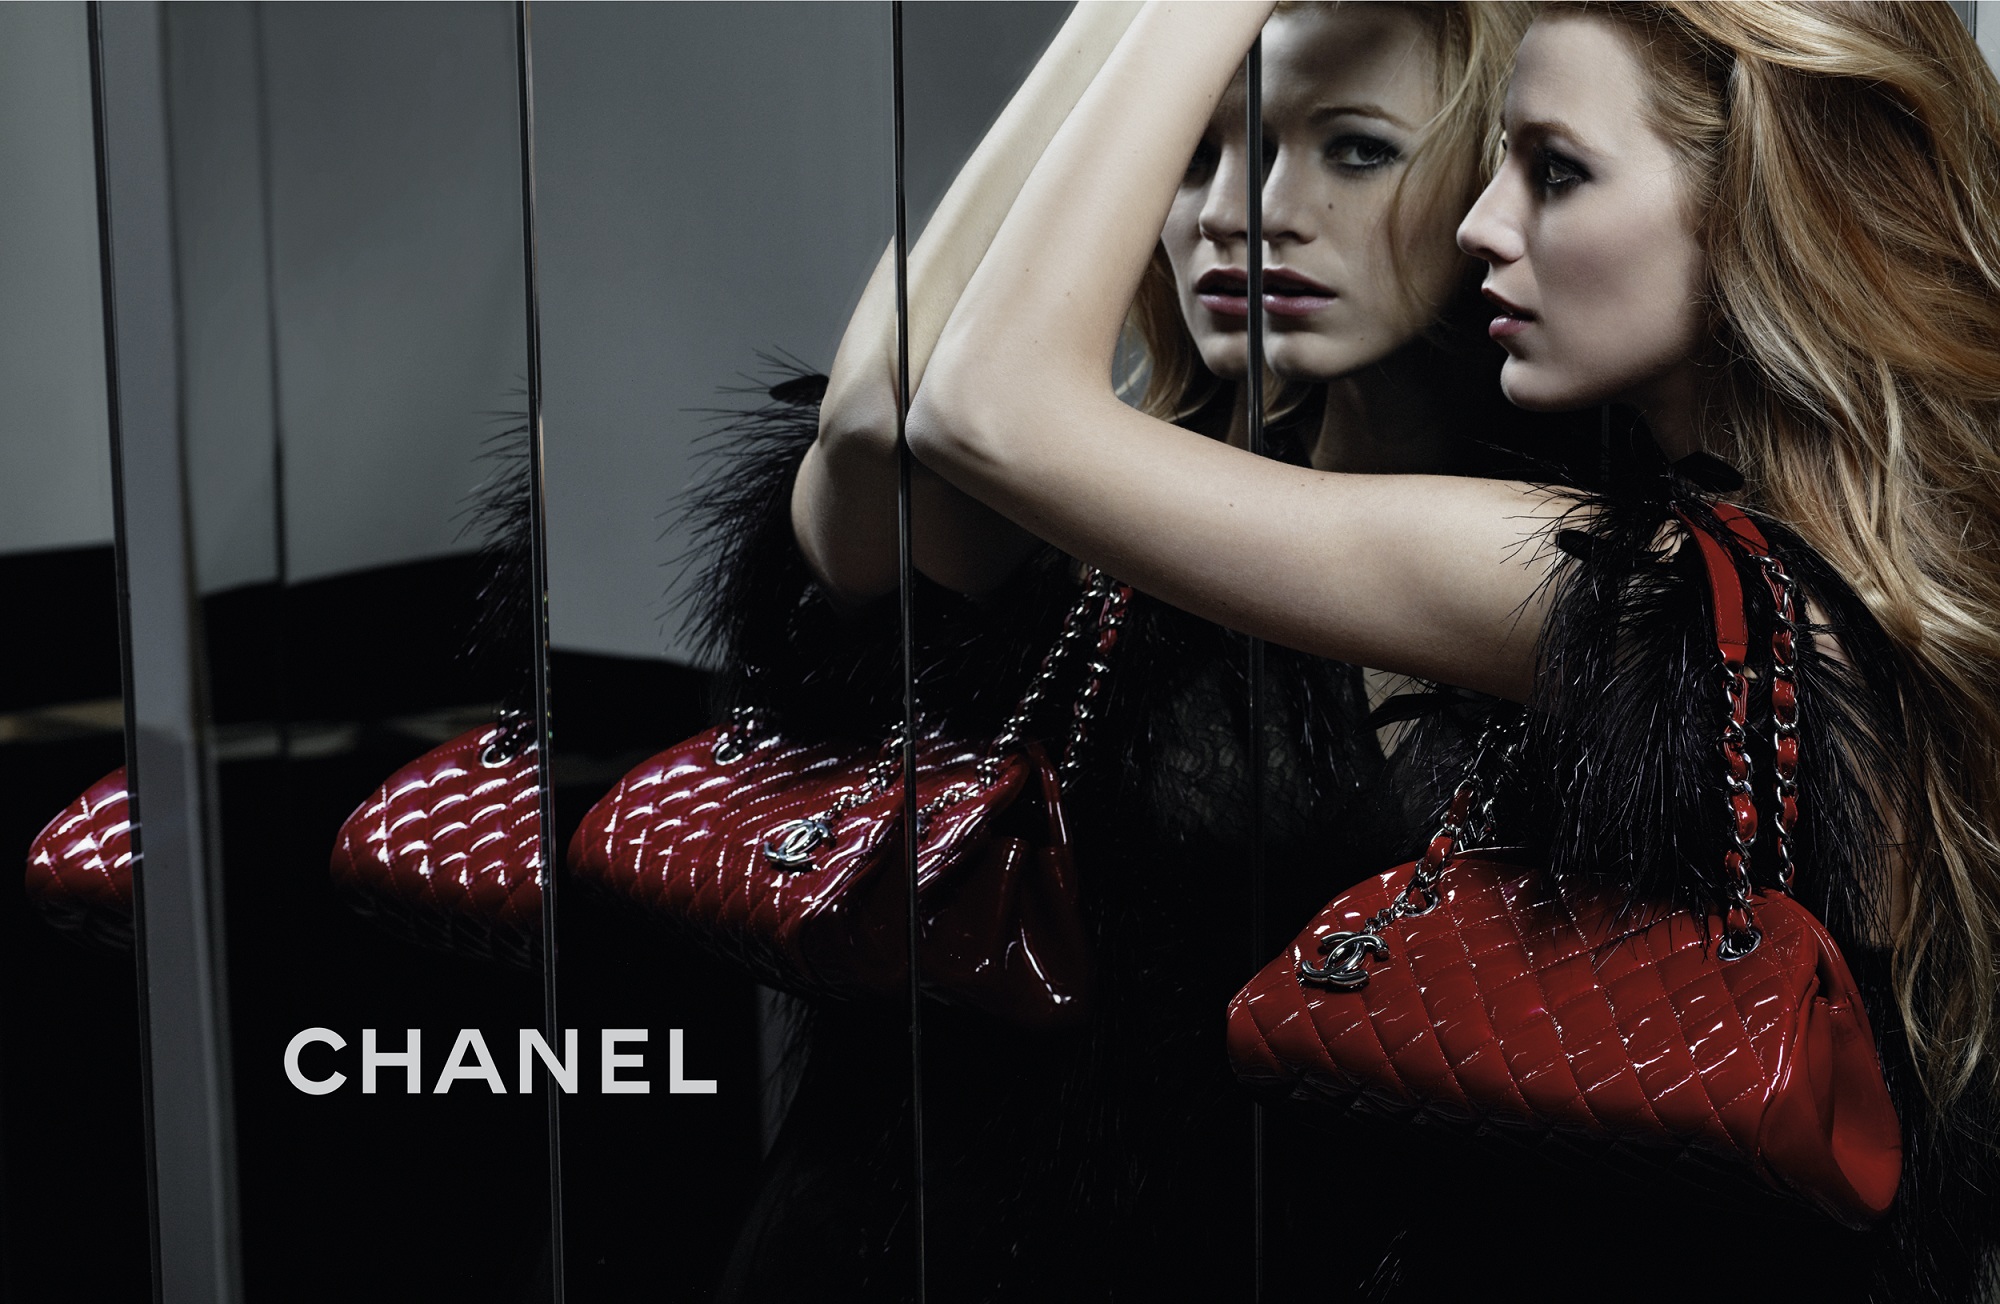 fashion, products, chanel, model, photography wallpaper for mobile